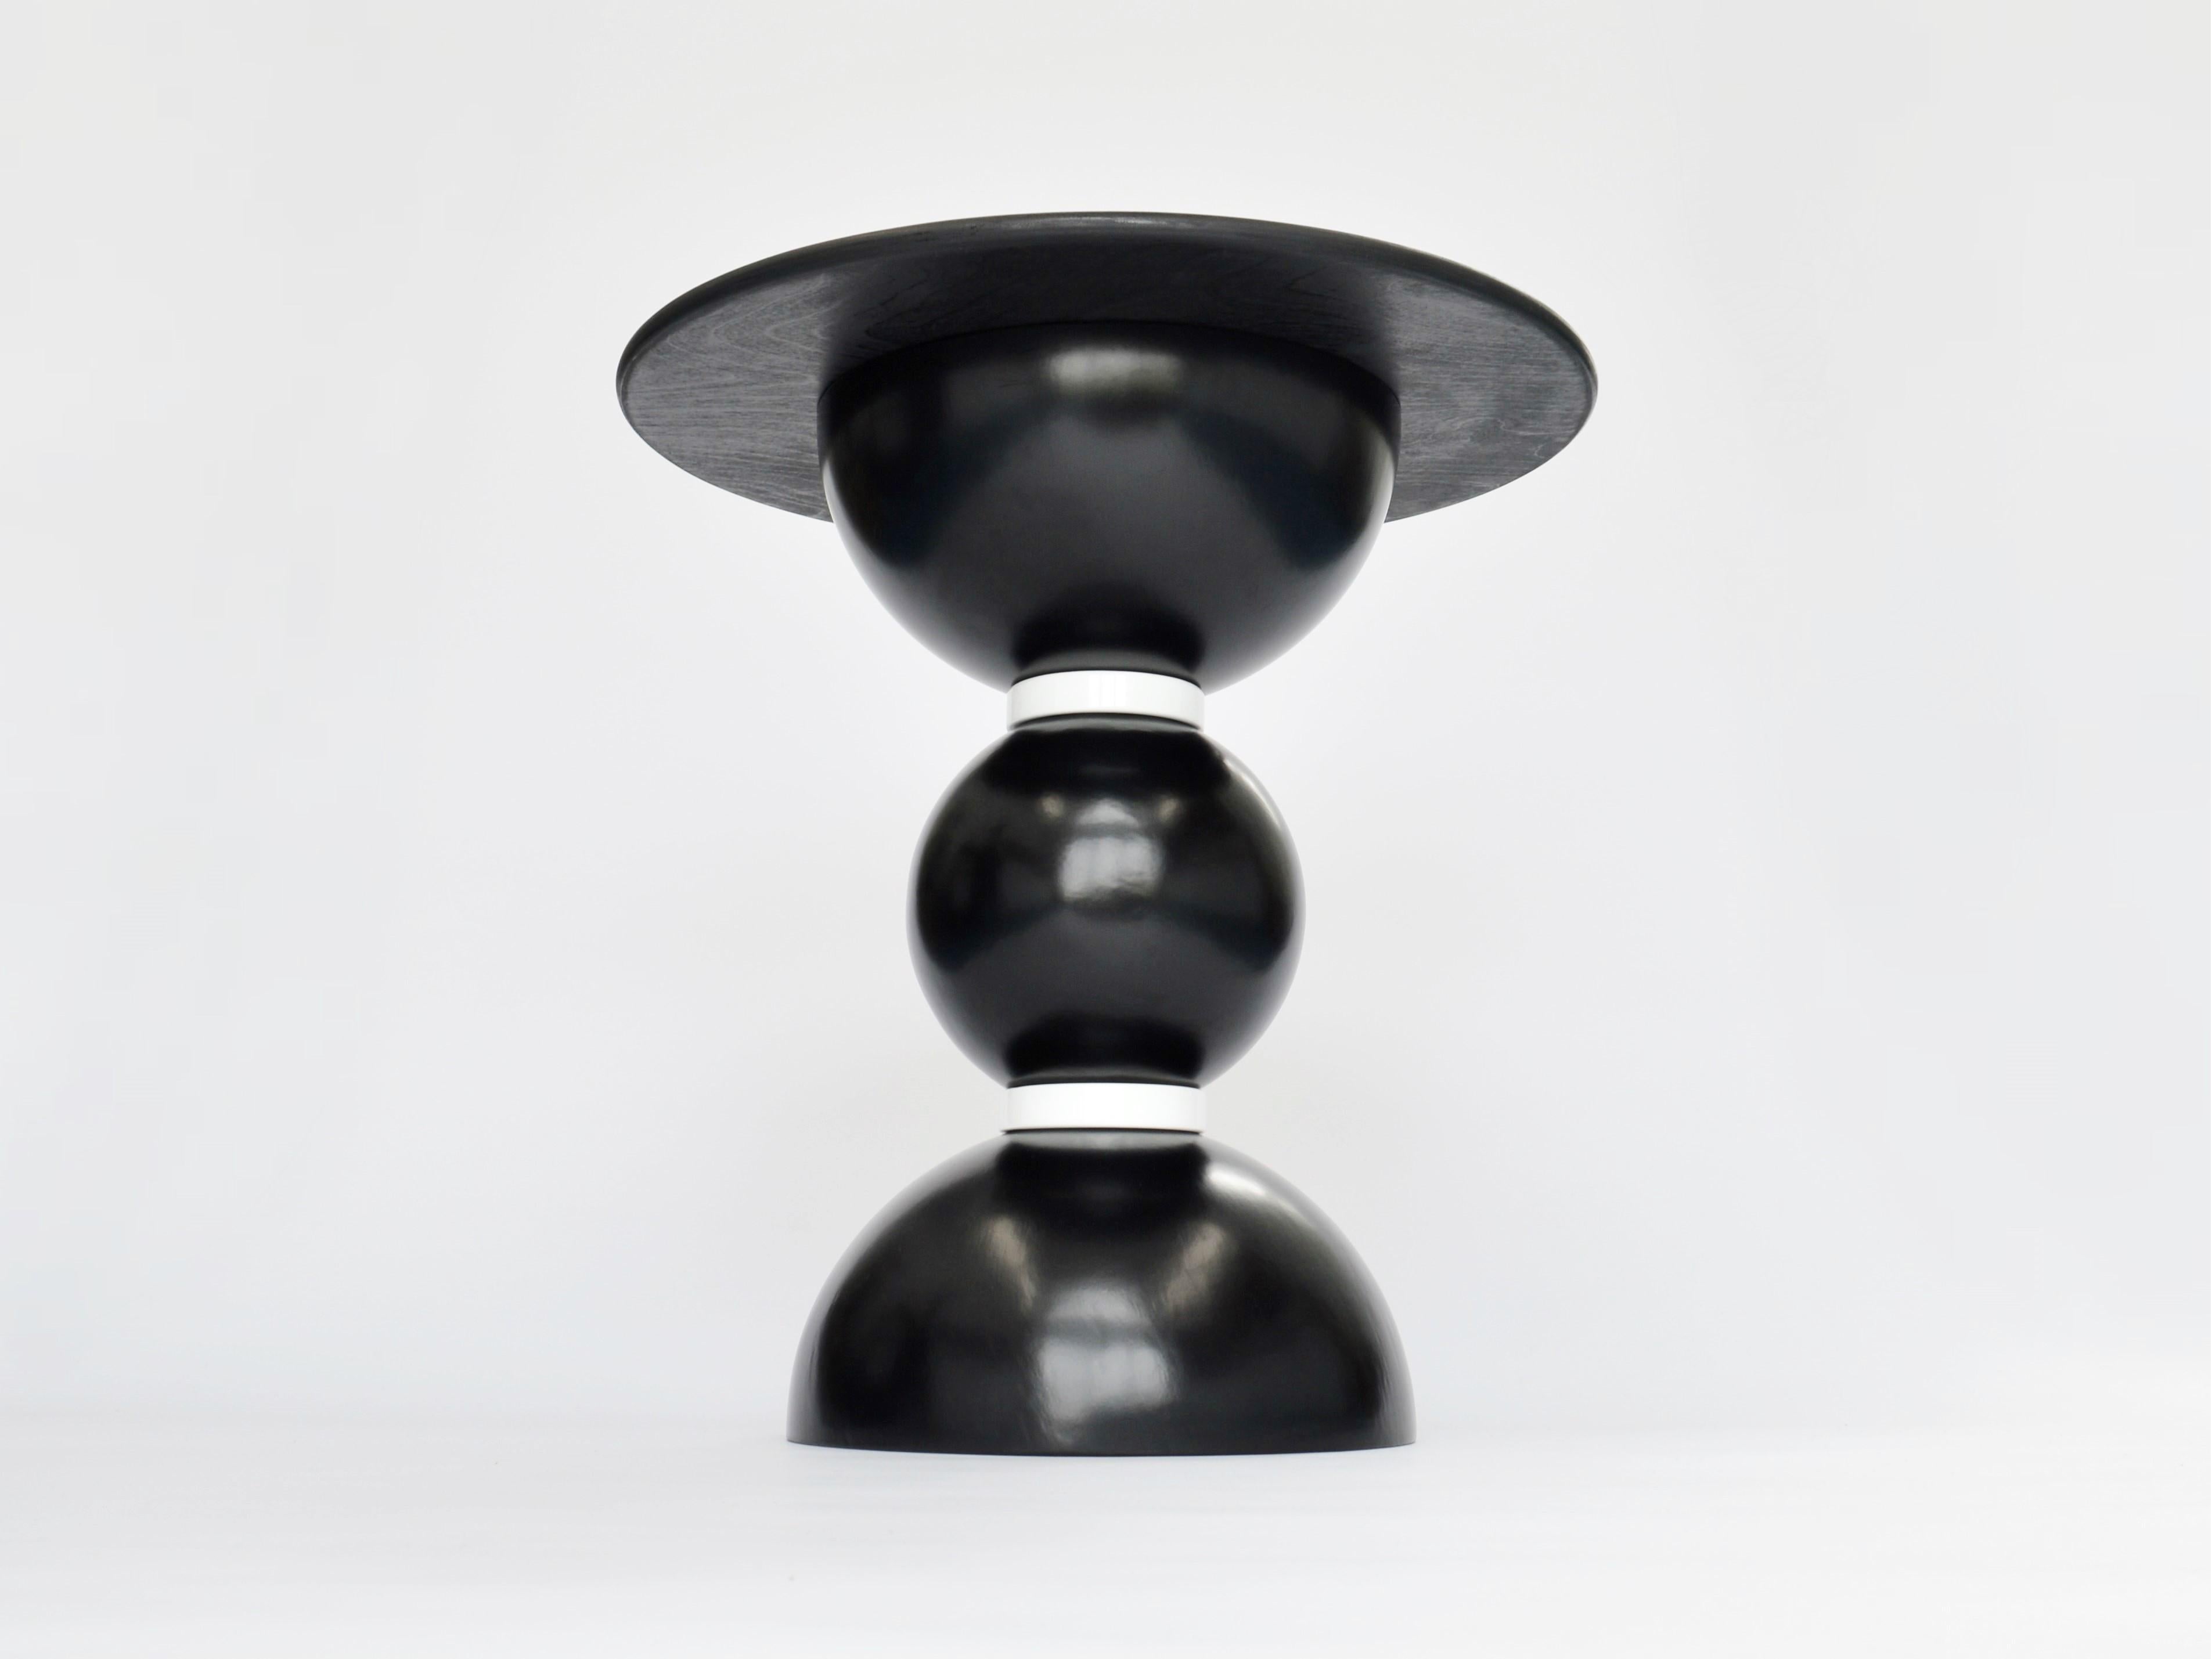 Contemporary side table designed and made by independent product and furniture designer Connor Holland.

The Pluto table is a black edition of the Saturn table from my Saturn six range. The rounded shapes of the table mimic the designs of rocket